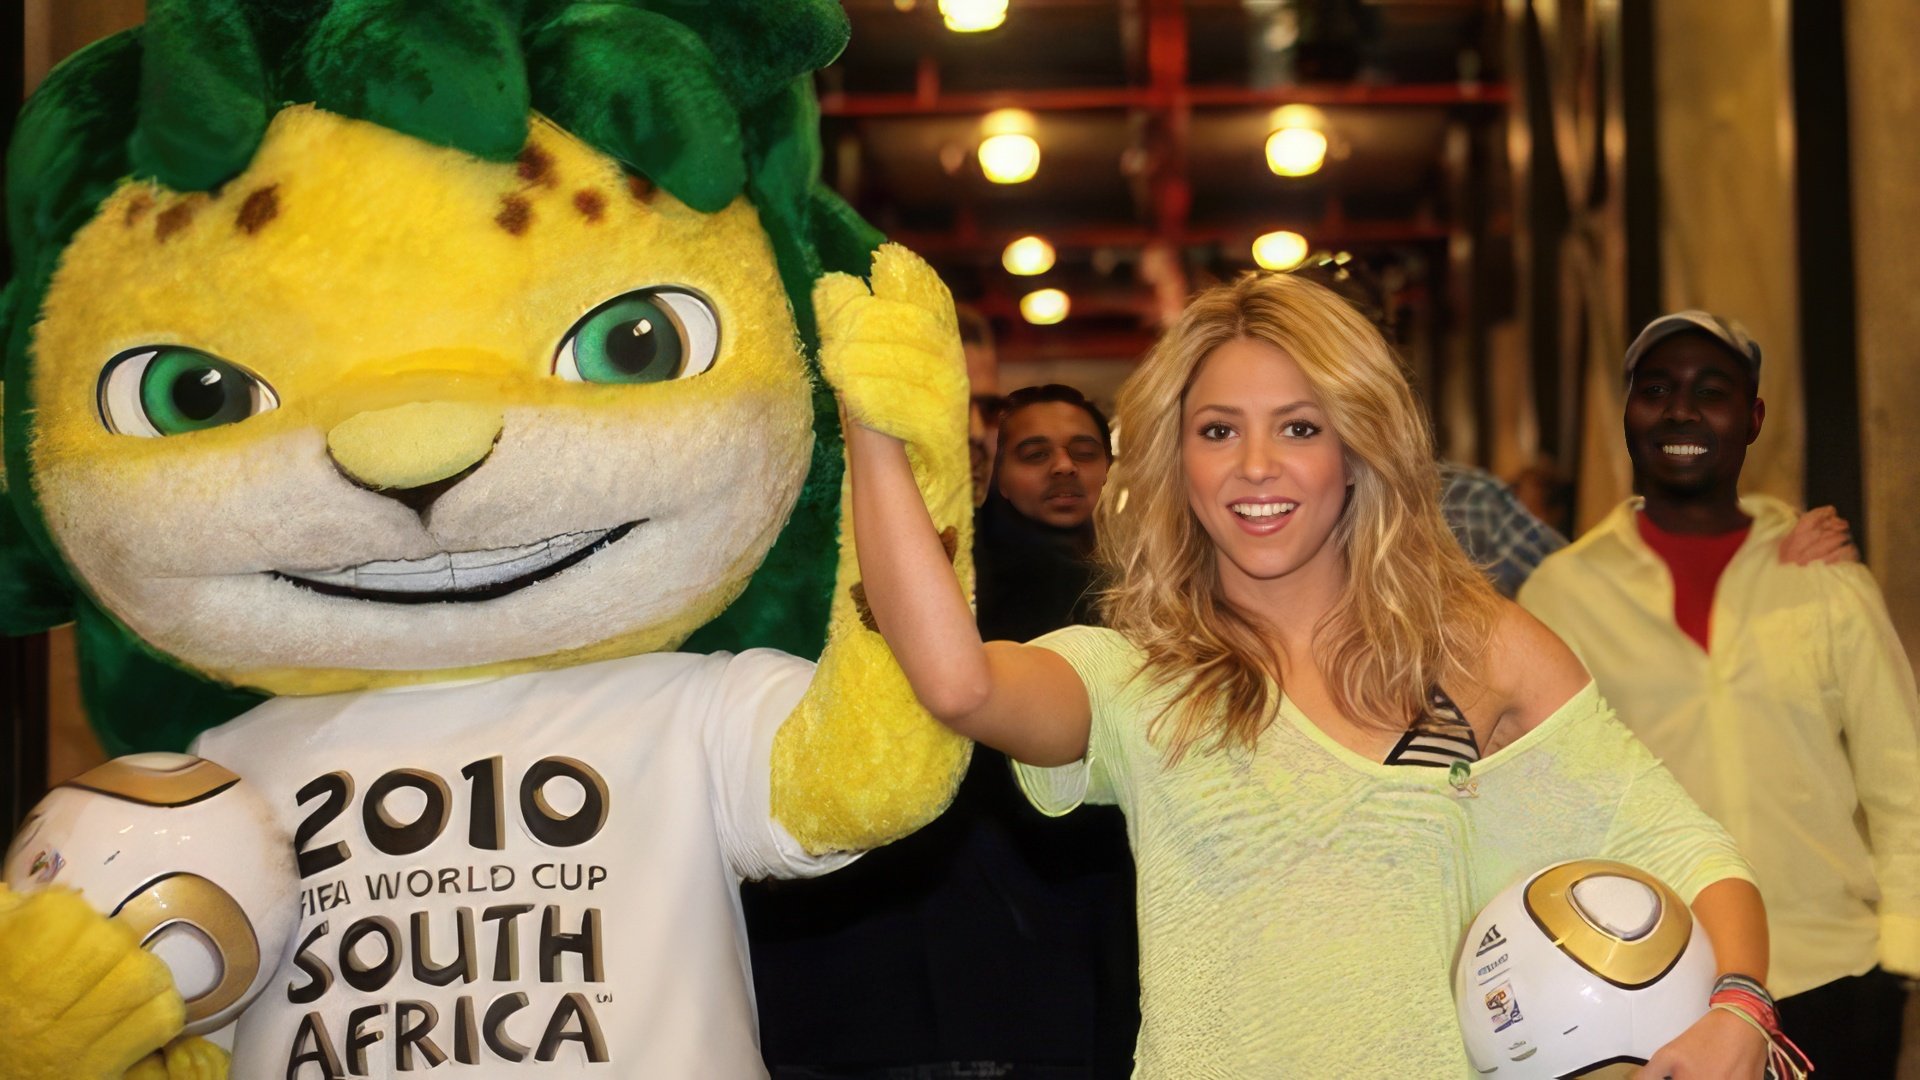 Shakira recorded the official song for the World Cup